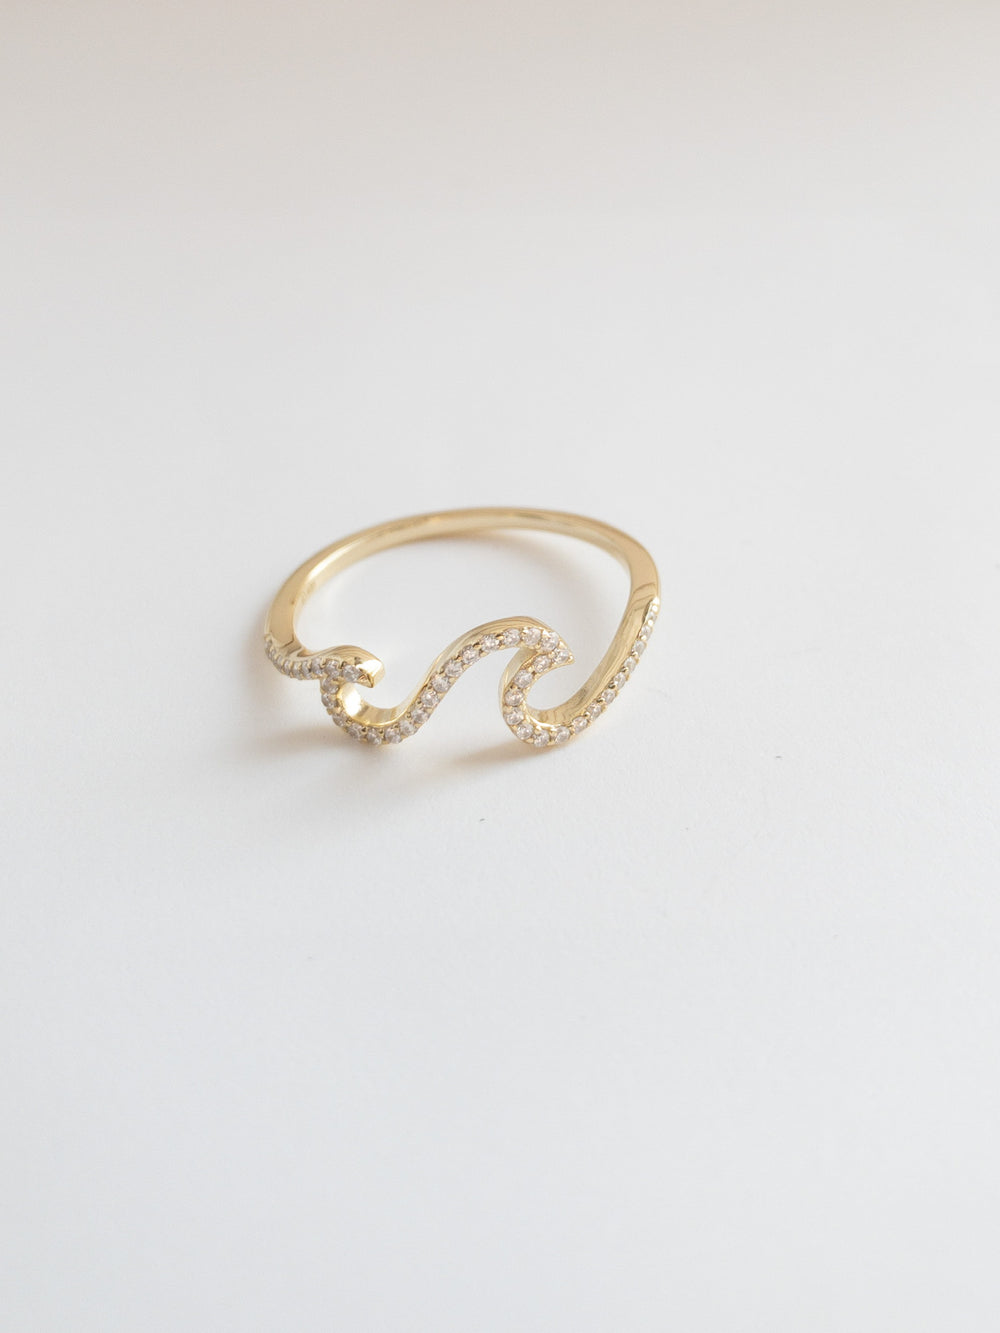 Sparkling double wave ring in gold sterling silver